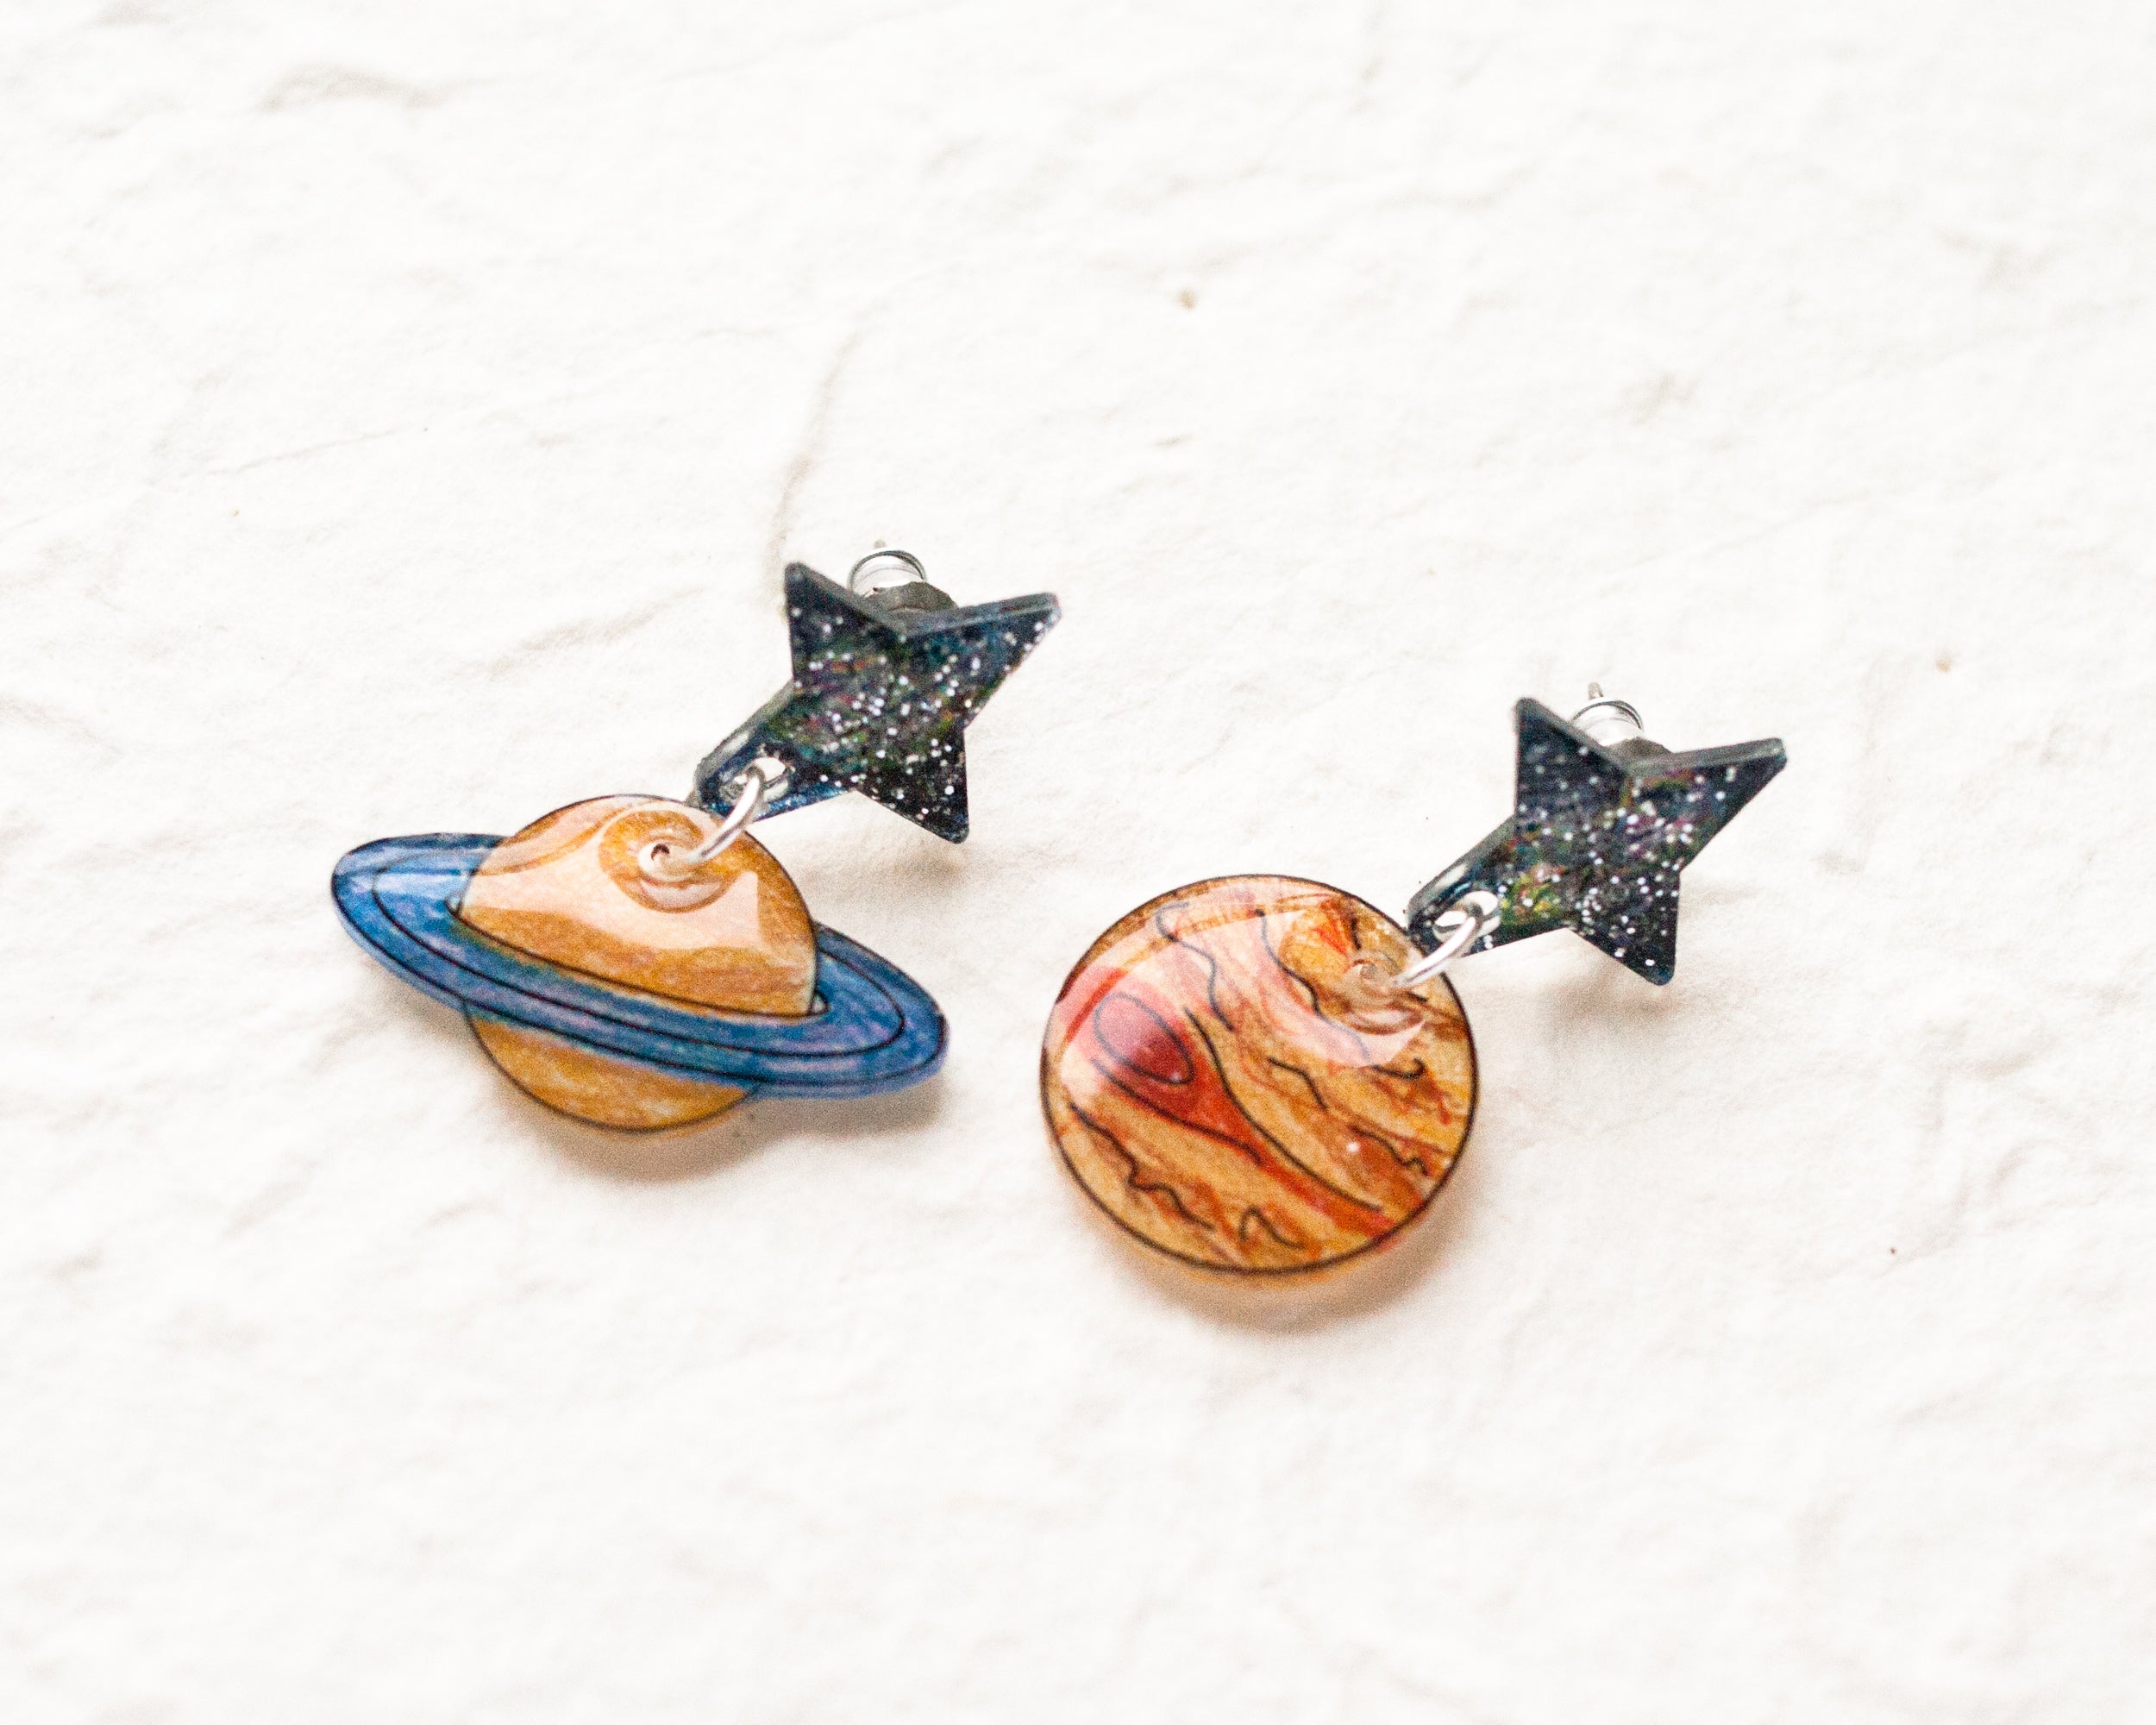 Jupiter and Saturn Planet Space Galaxy Earrings